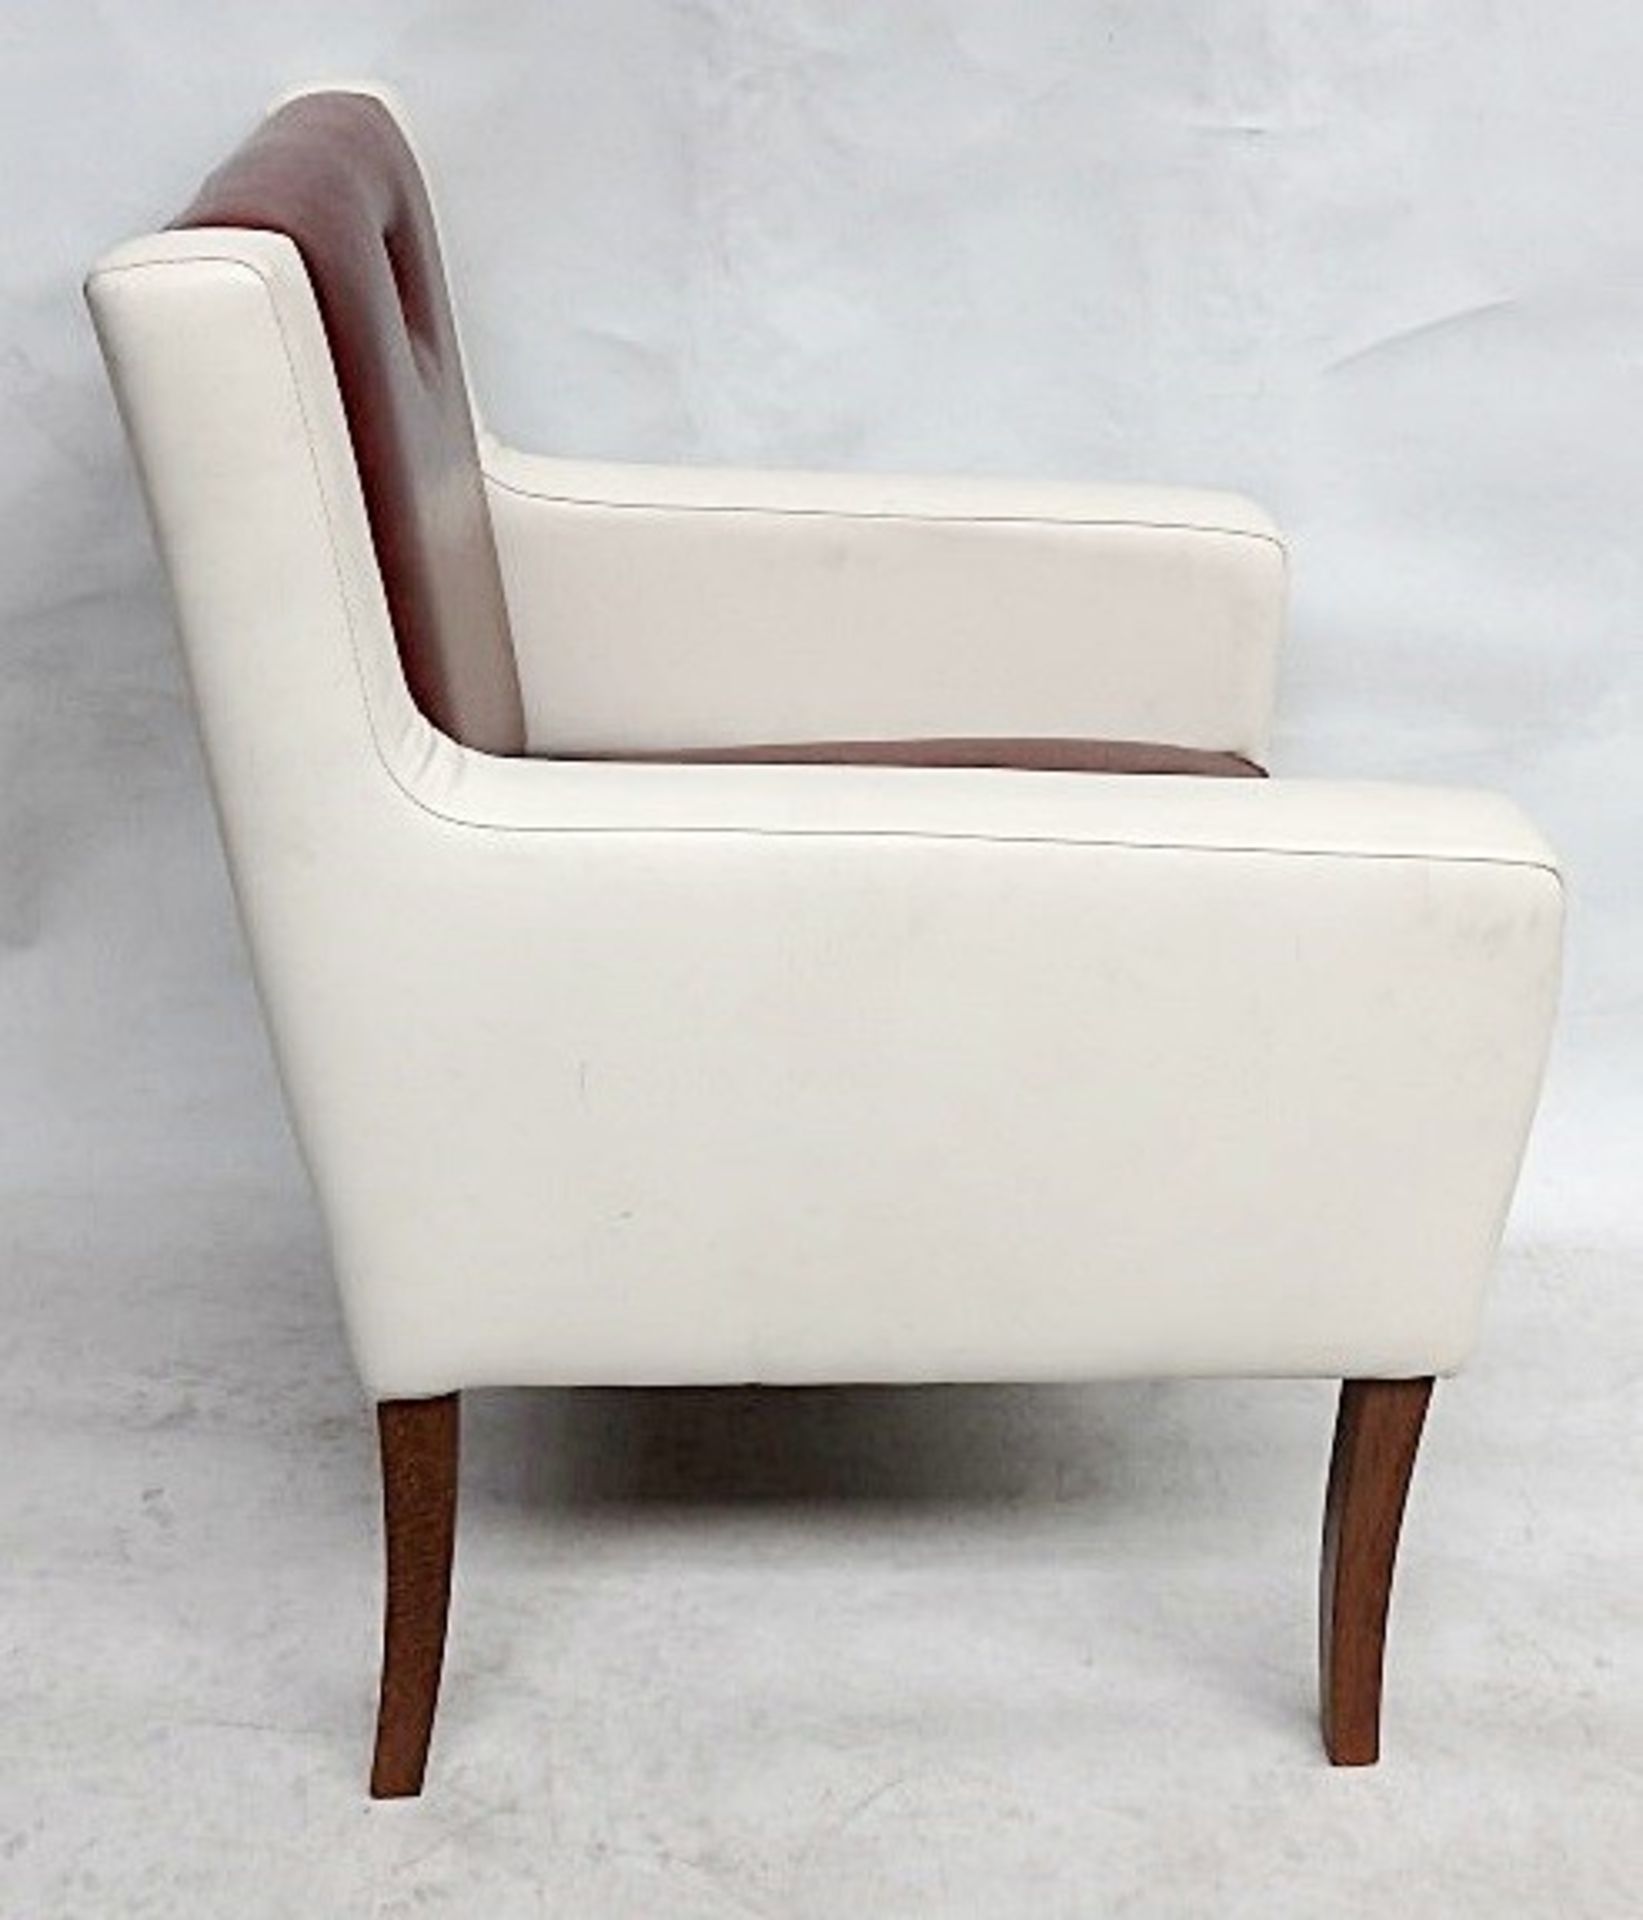 1 x Bespoke Armchair - Upholstered In Cream & Tan Leathers - Handcrafted & Upholstered By British - Image 4 of 8